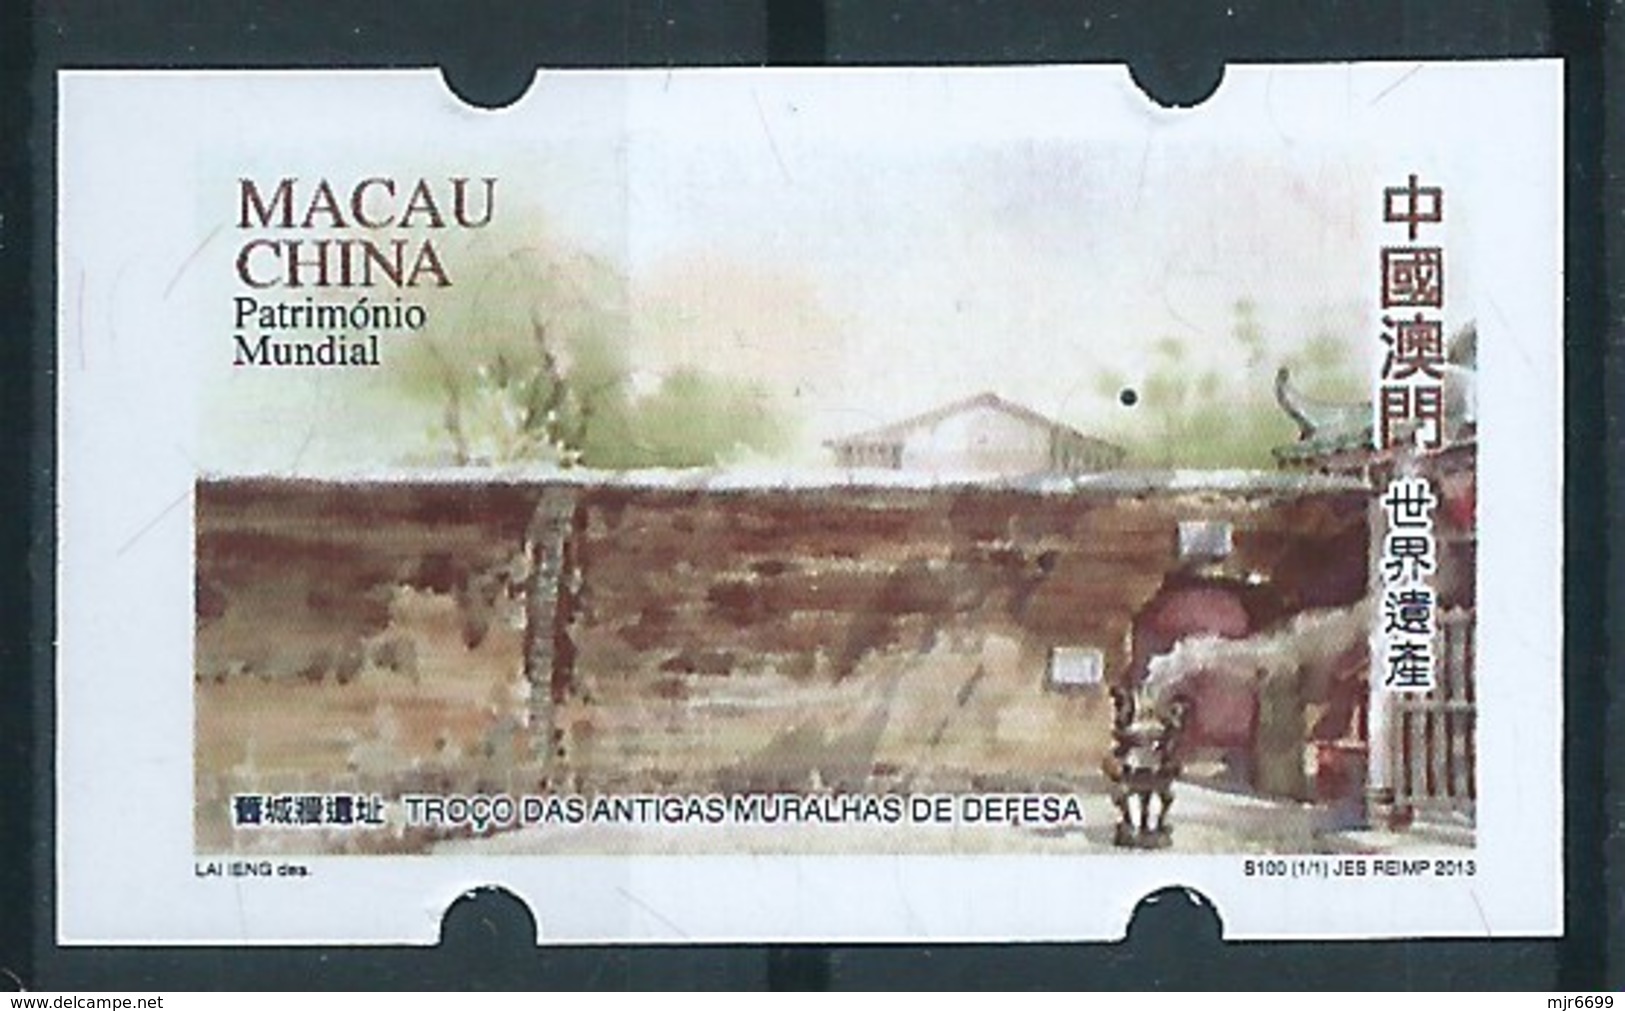 MACAU 2013 WORLD HERITAGE REPRINT ISSUE, ERROR PRINTING, VALUE OMITTED - Distributeurs